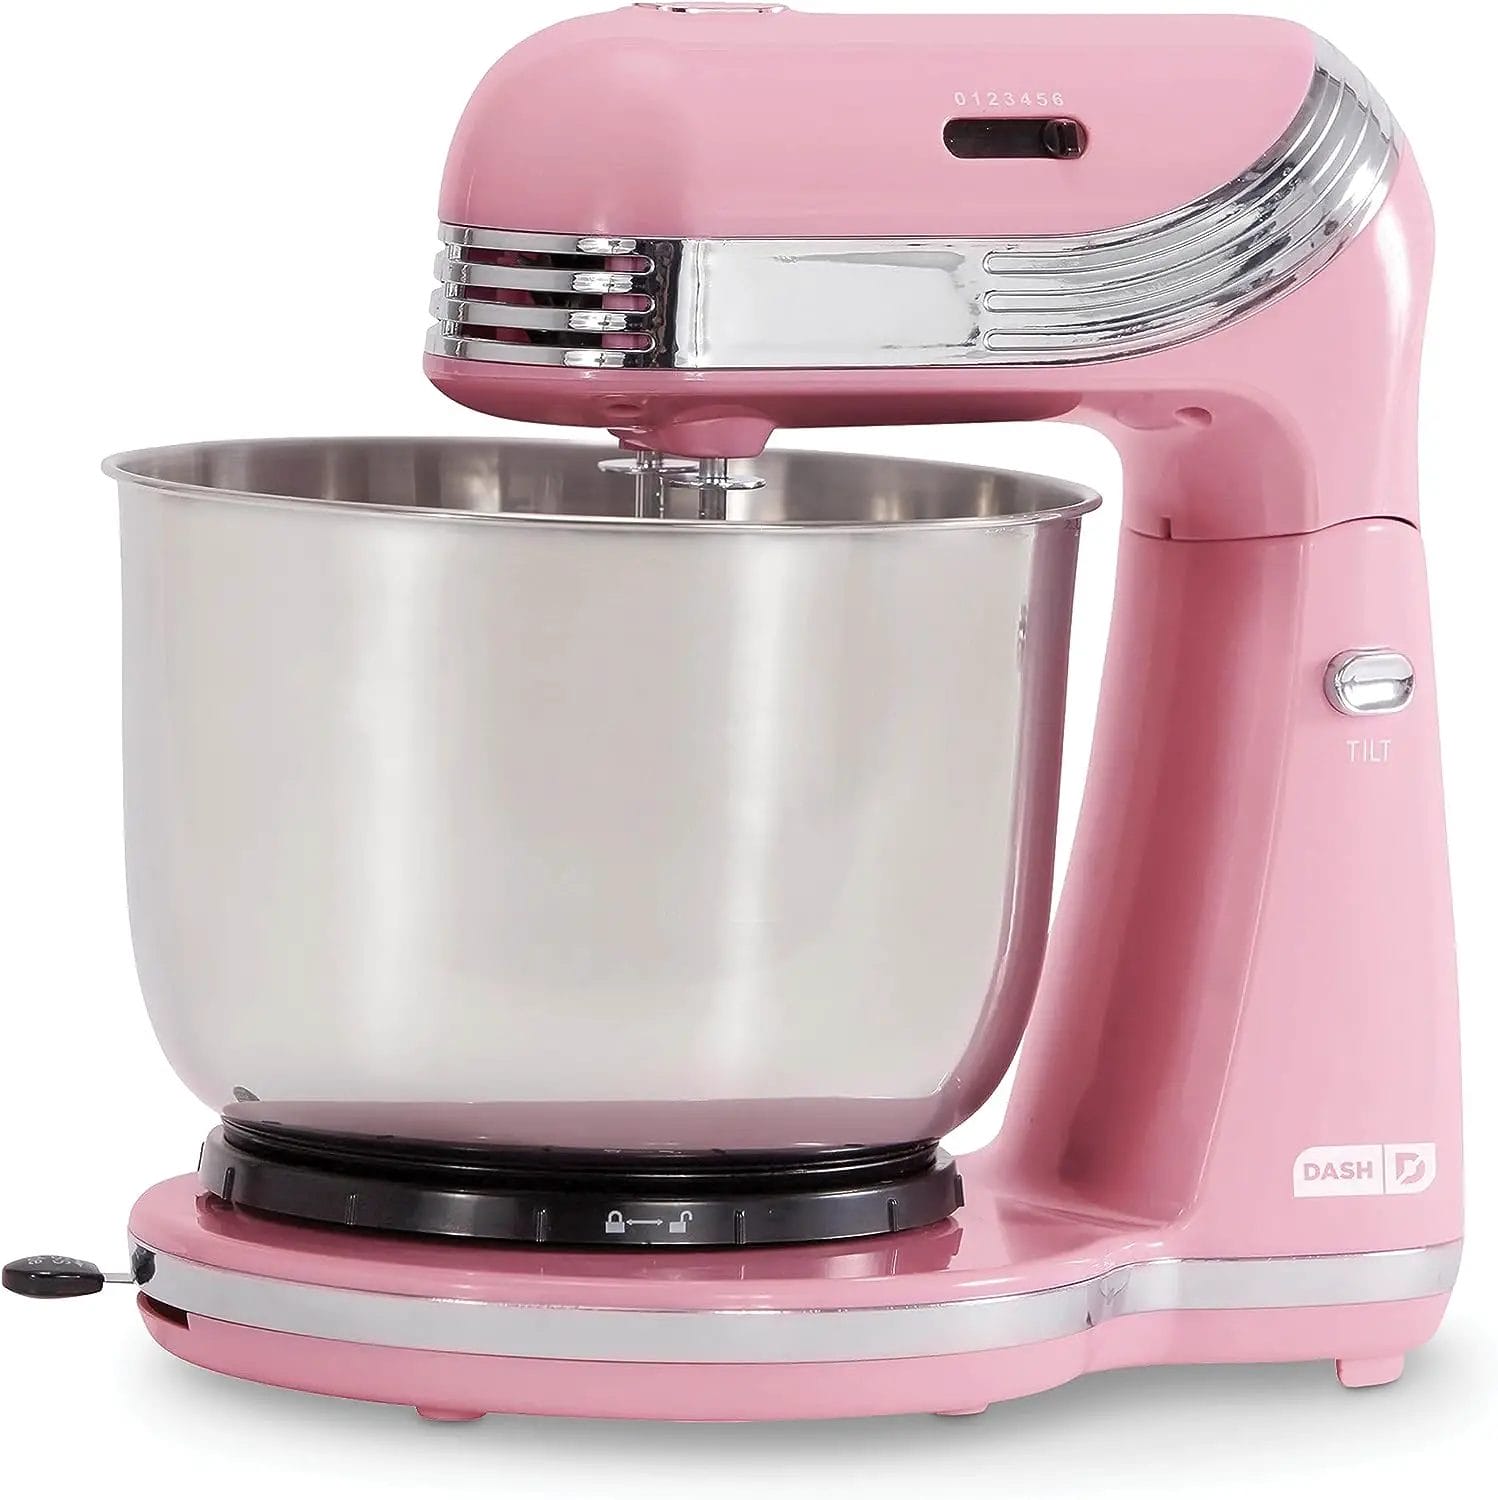 Dash Stand Mixer (Electric Mixer for Everyday Use): 6 Speed Stand Mixer with 3 Quart Stainless Steel Mixing Bowl, Dough Hooks  Mixer Beaters for Dressings, Frosting, Meringues  More - Pink